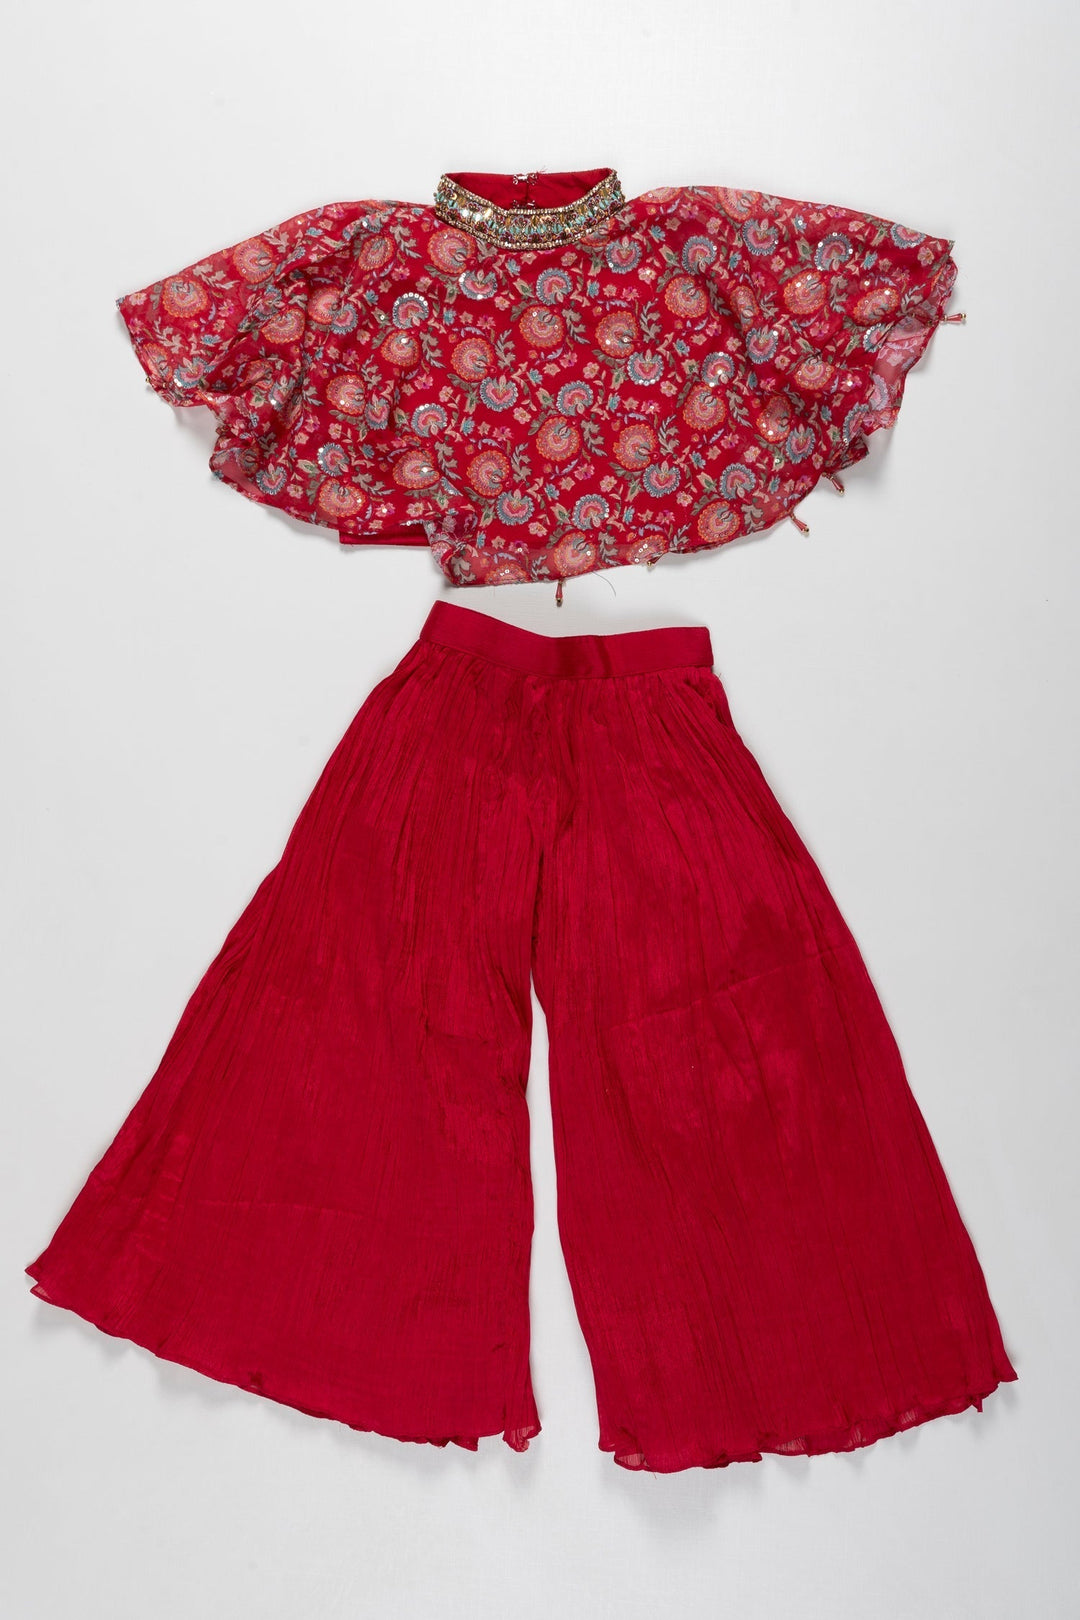 The Nesavu Girls Sharara / Plazo Set Radiant Red Designer Top with Palazzo Pants Set for Girls - A Festive Fusion Nesavu 22 (4Y) / Red / Georgette GPS287A-22 Girls Festive Red Designer Top and Palazzo Set | Celebrate in Style | The Nesavu